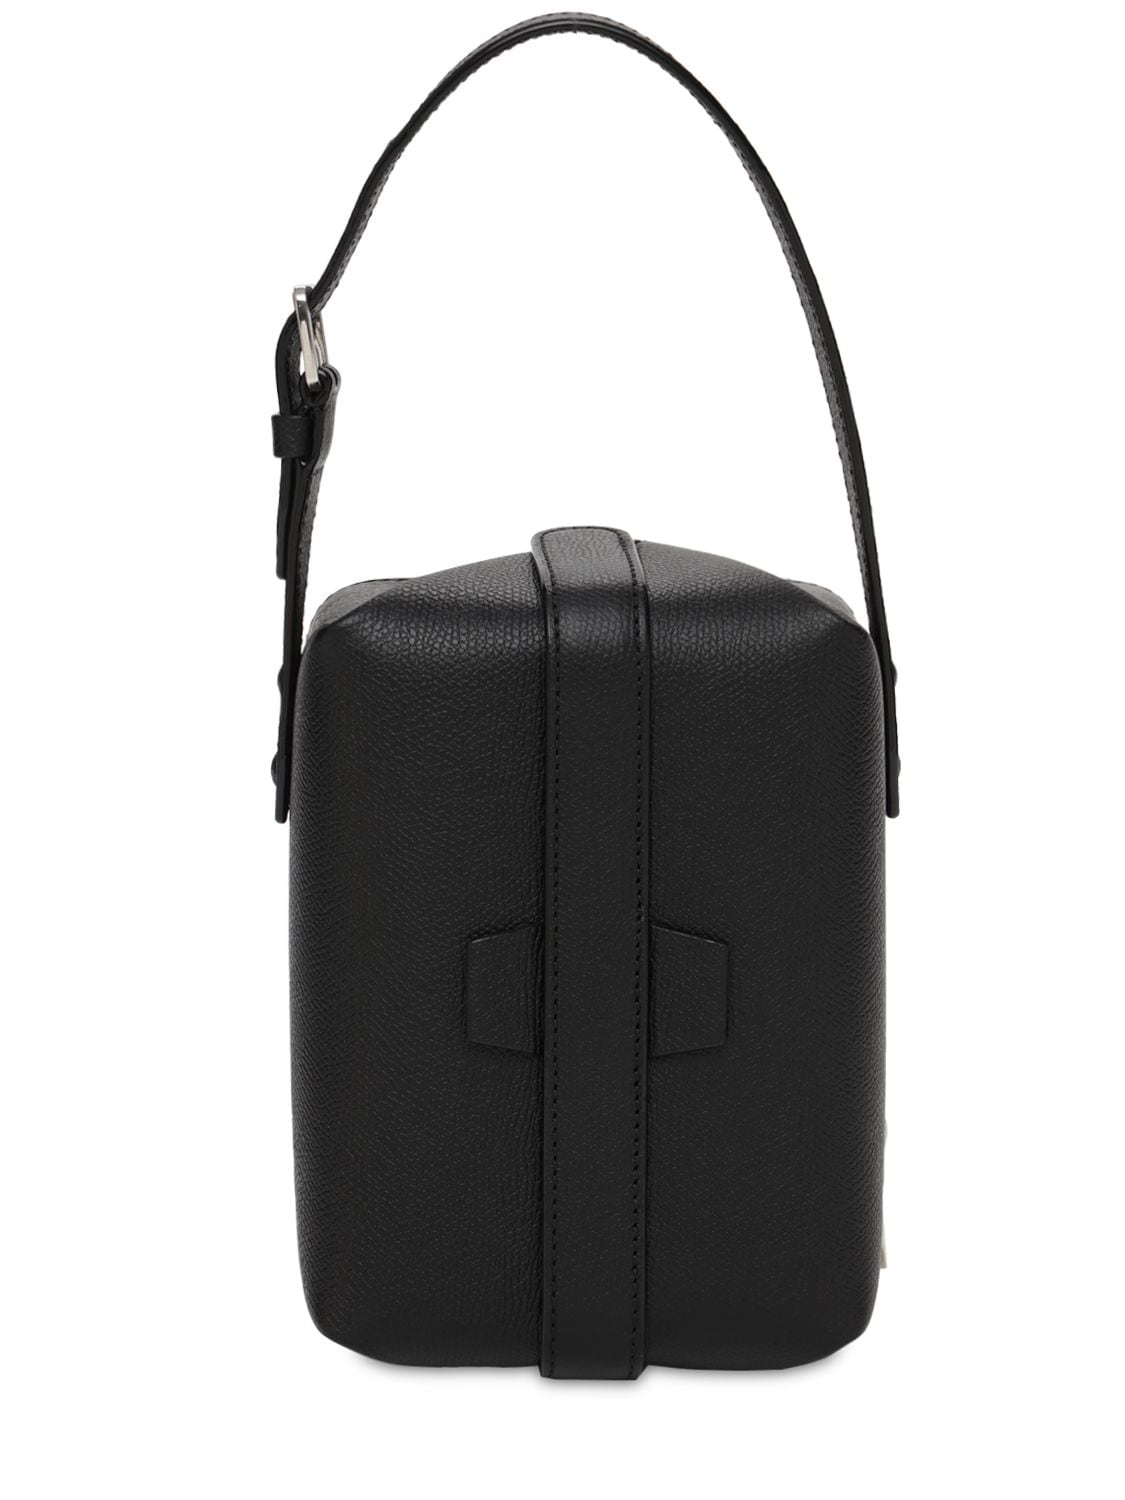 Valextra New Tric Trac Grained Leather Bag In Black